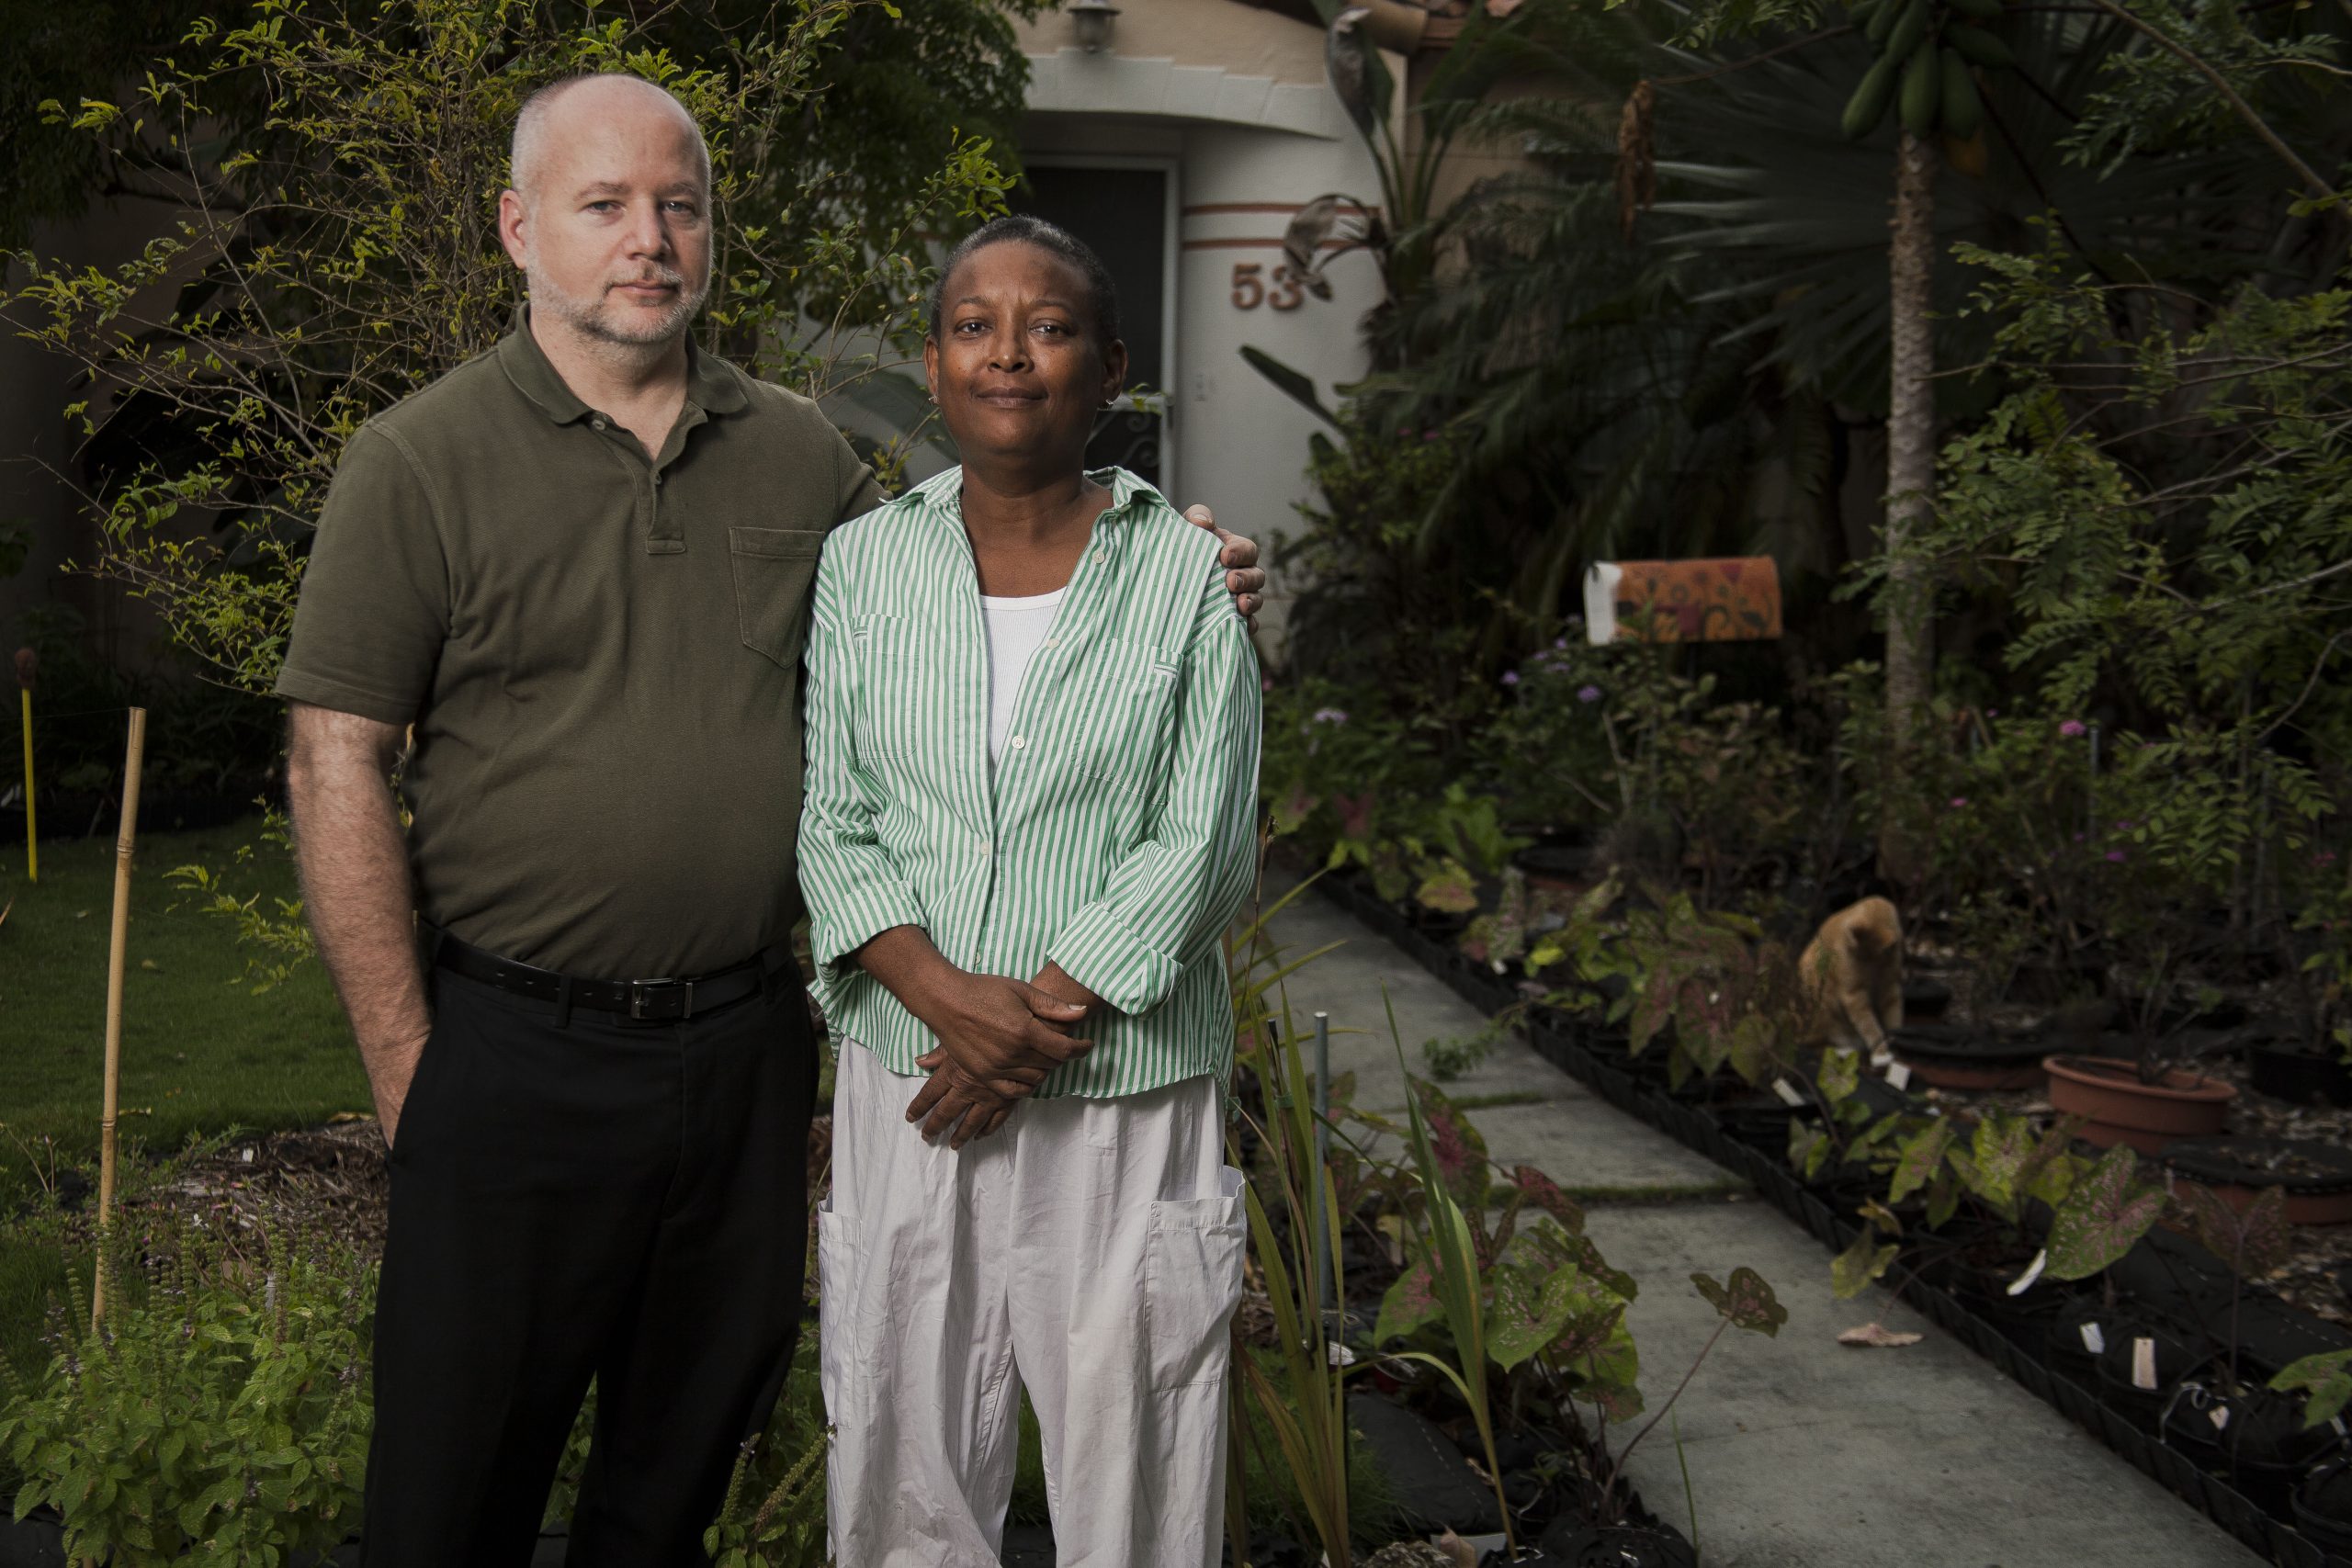 Miami Couple Must Destroy 17-year-old Front Yard Garden After 3-Year Legal Battle